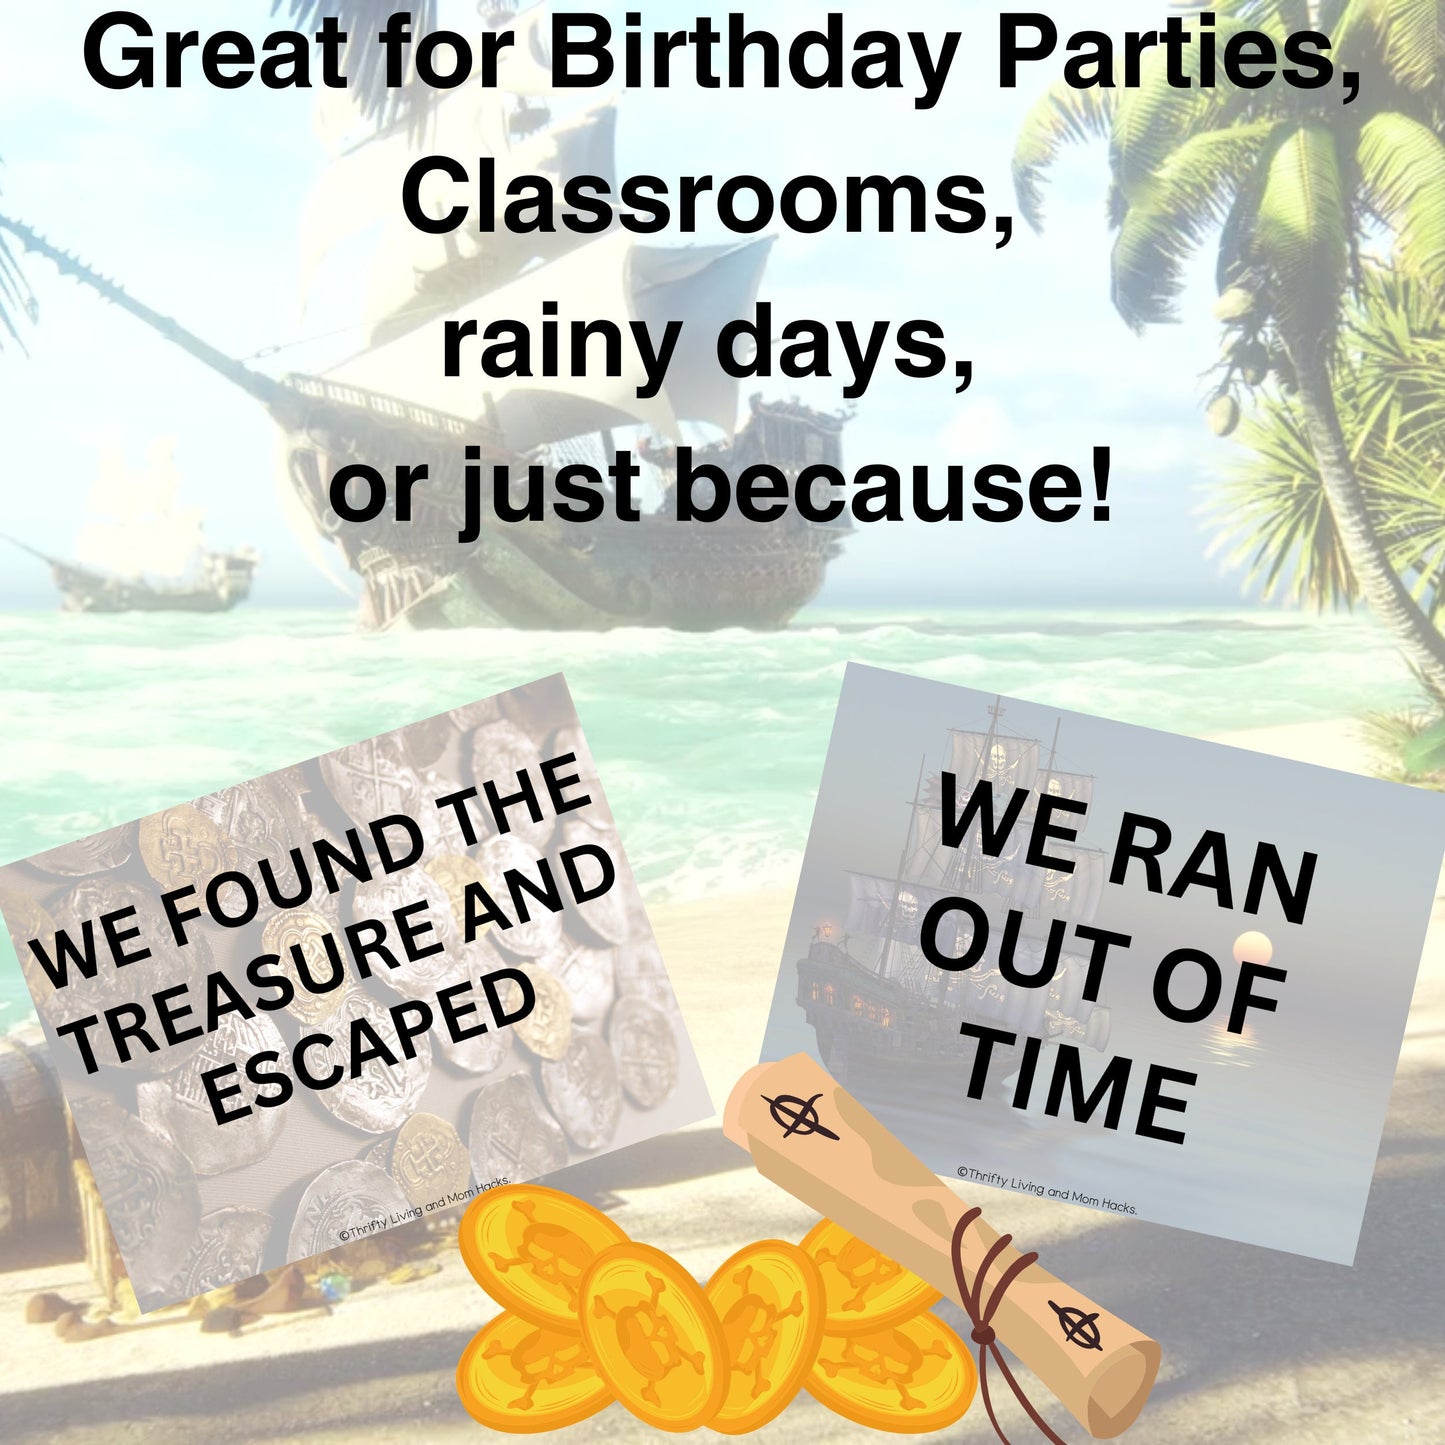 Island Escape Quest for Pirate's Fortune Kids Escape Room Printable Instant download Pirate theme party game Print and Play Escape Room